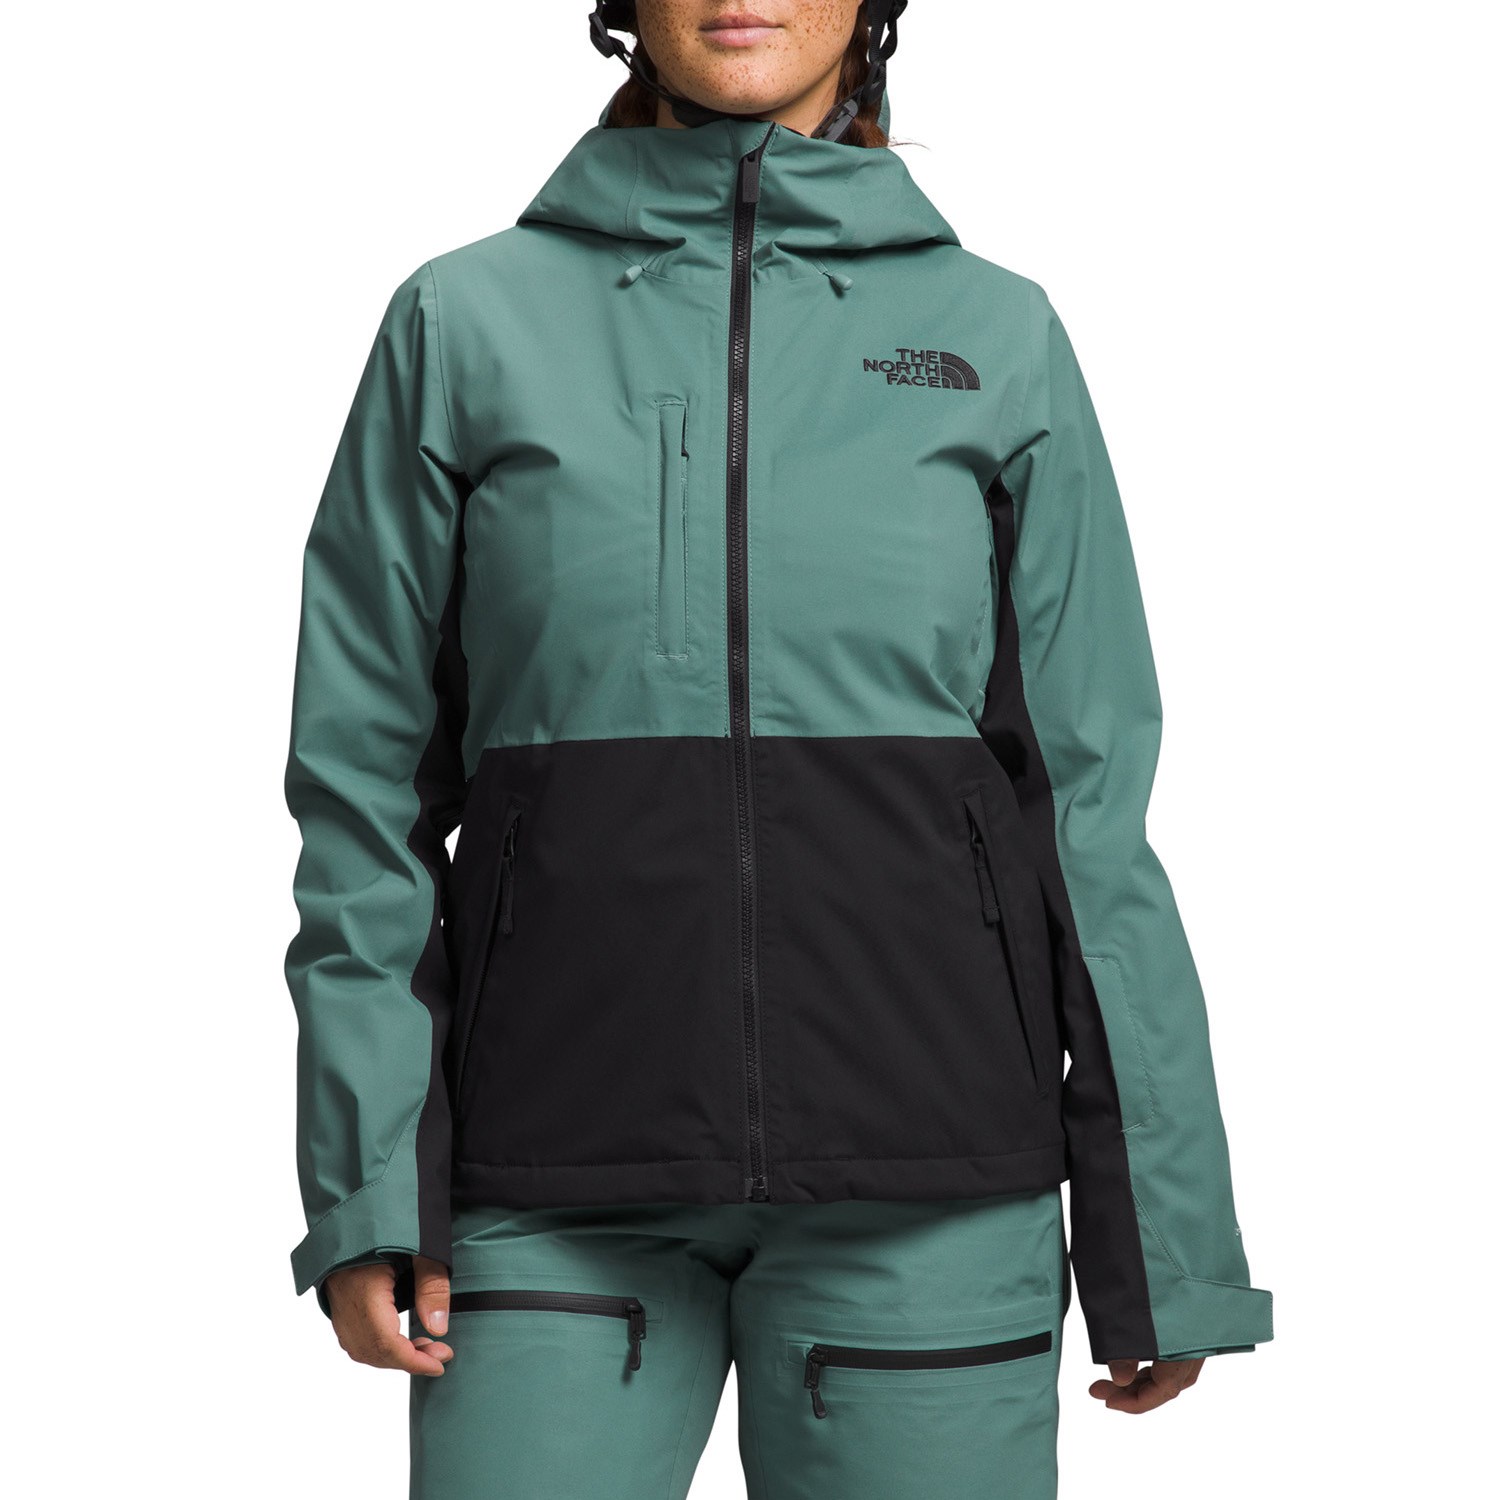 https://images.evo.com/imgp/zoom/238423/1059135/the-north-face-freedom-stretch-jacket-women-s-.jpg